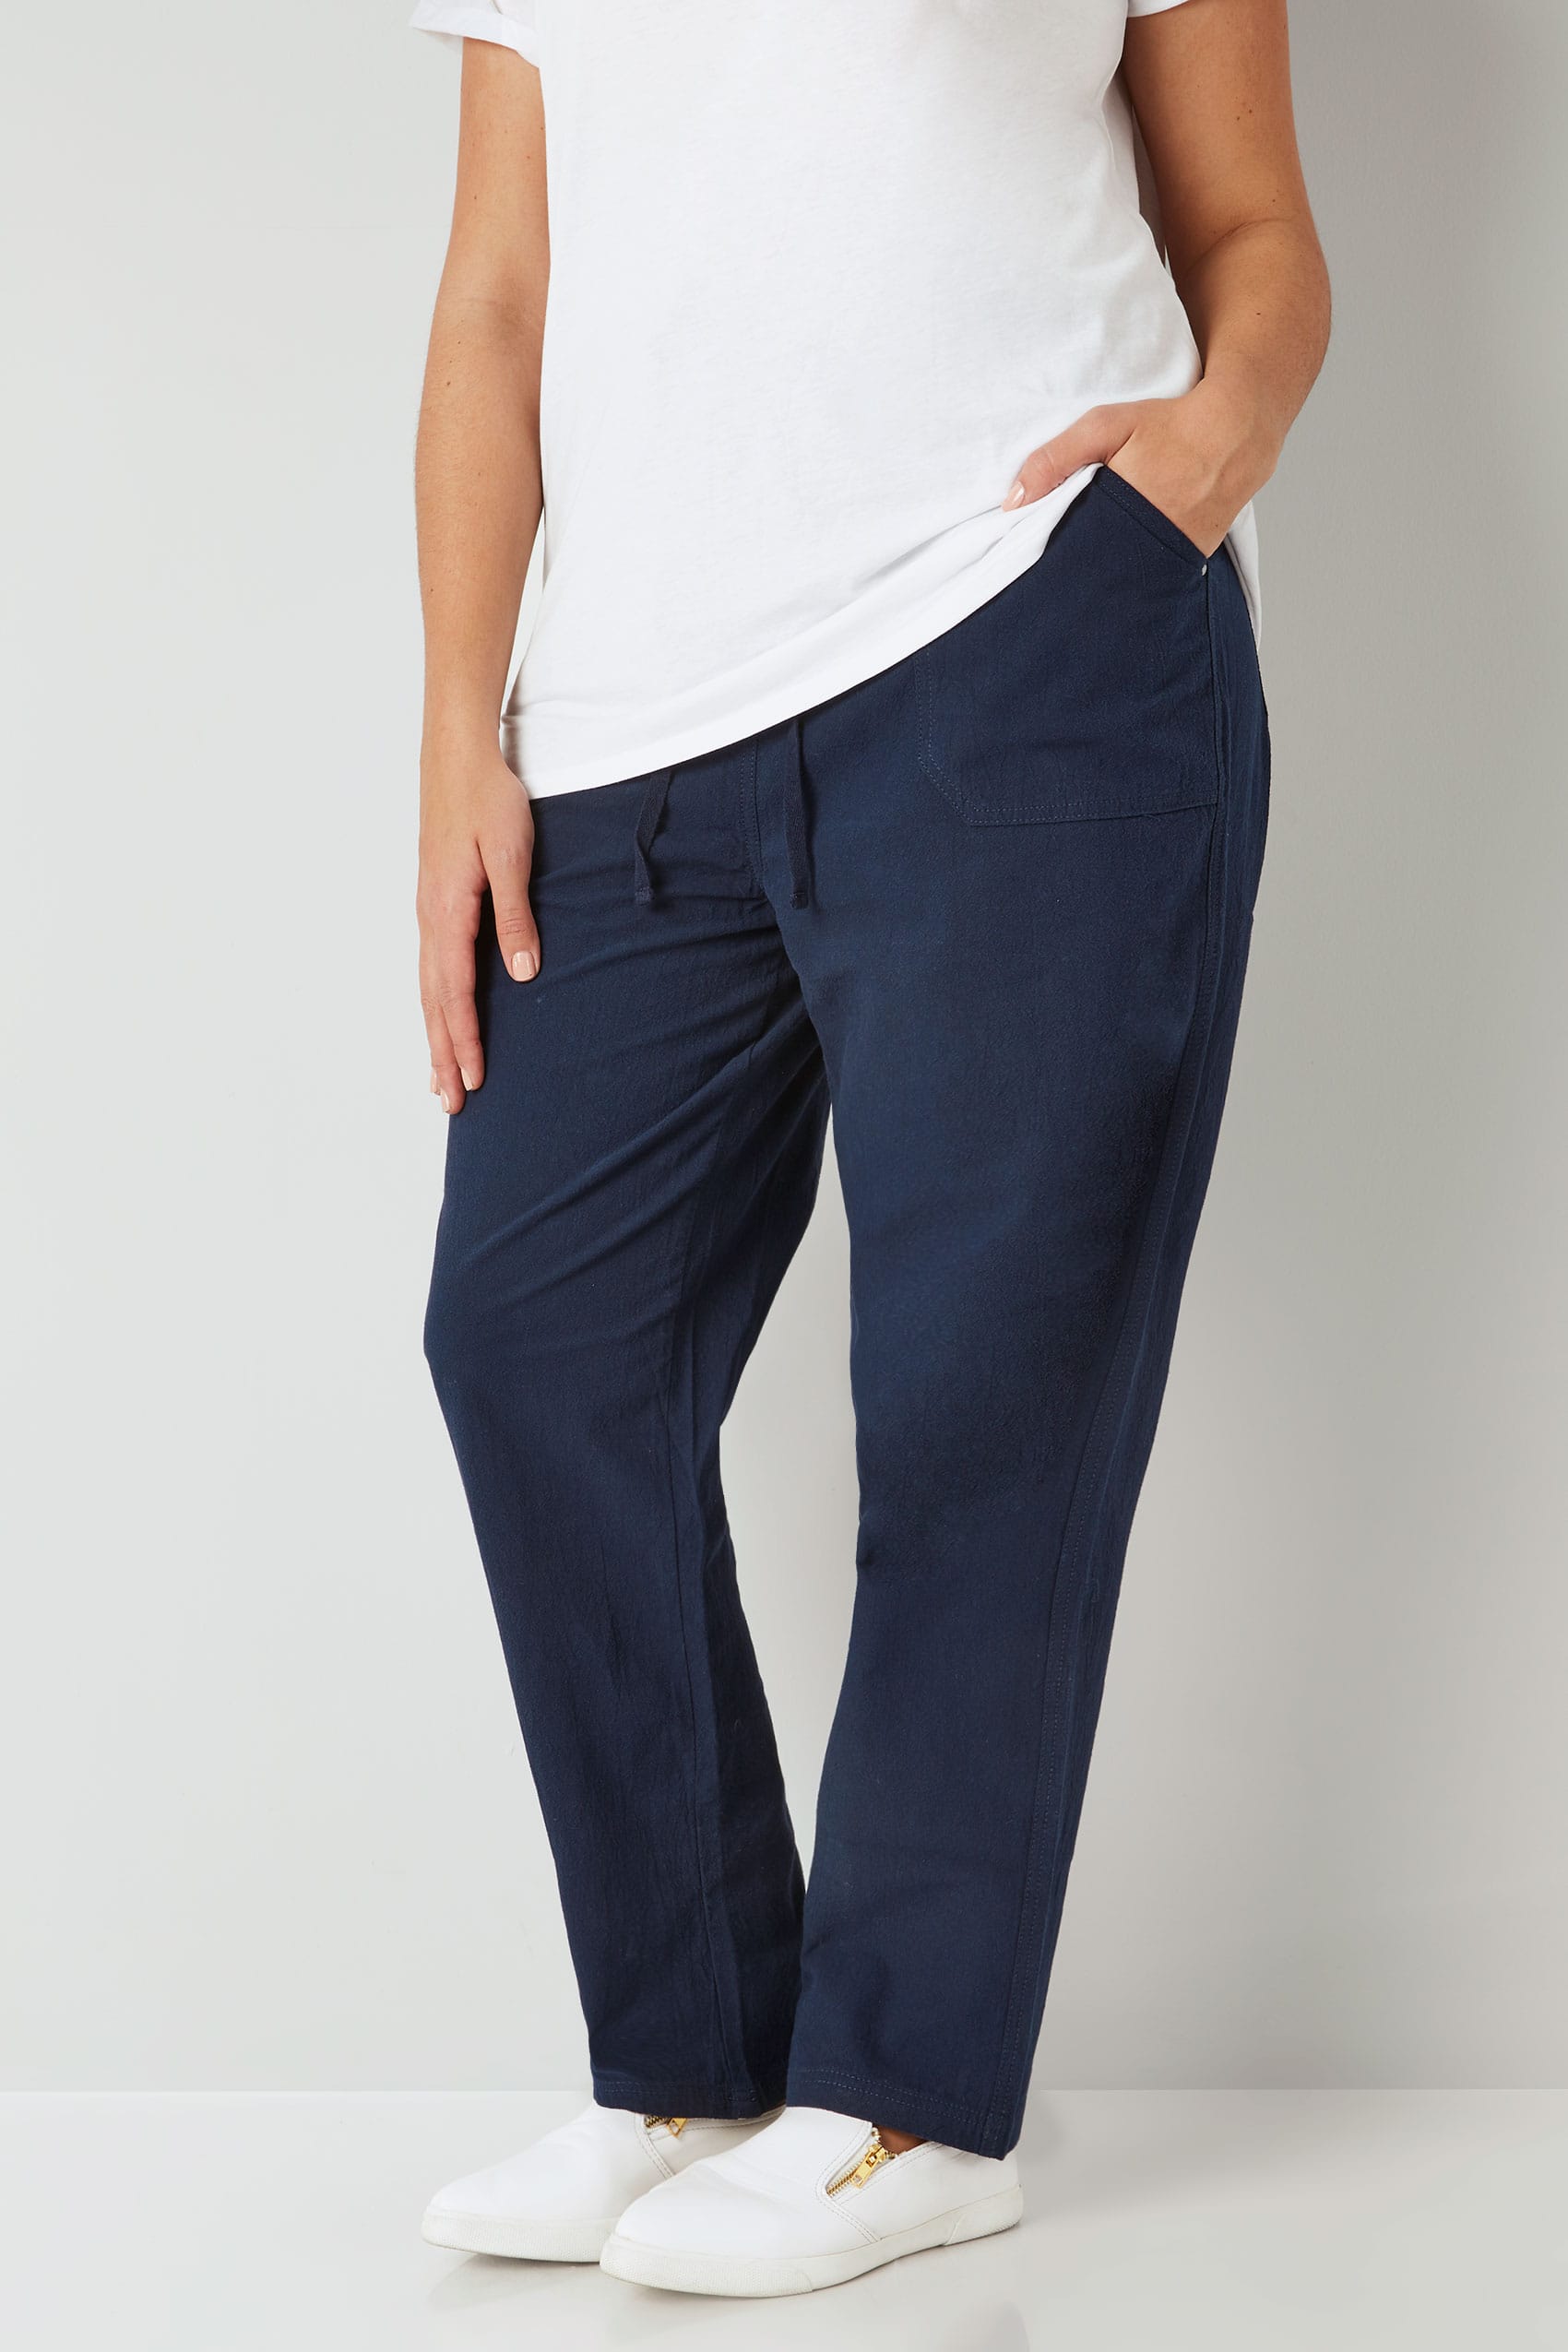 Navy Cool Cotton Pull On Wide Leg Trousers With Pockets plus size 16 to 36